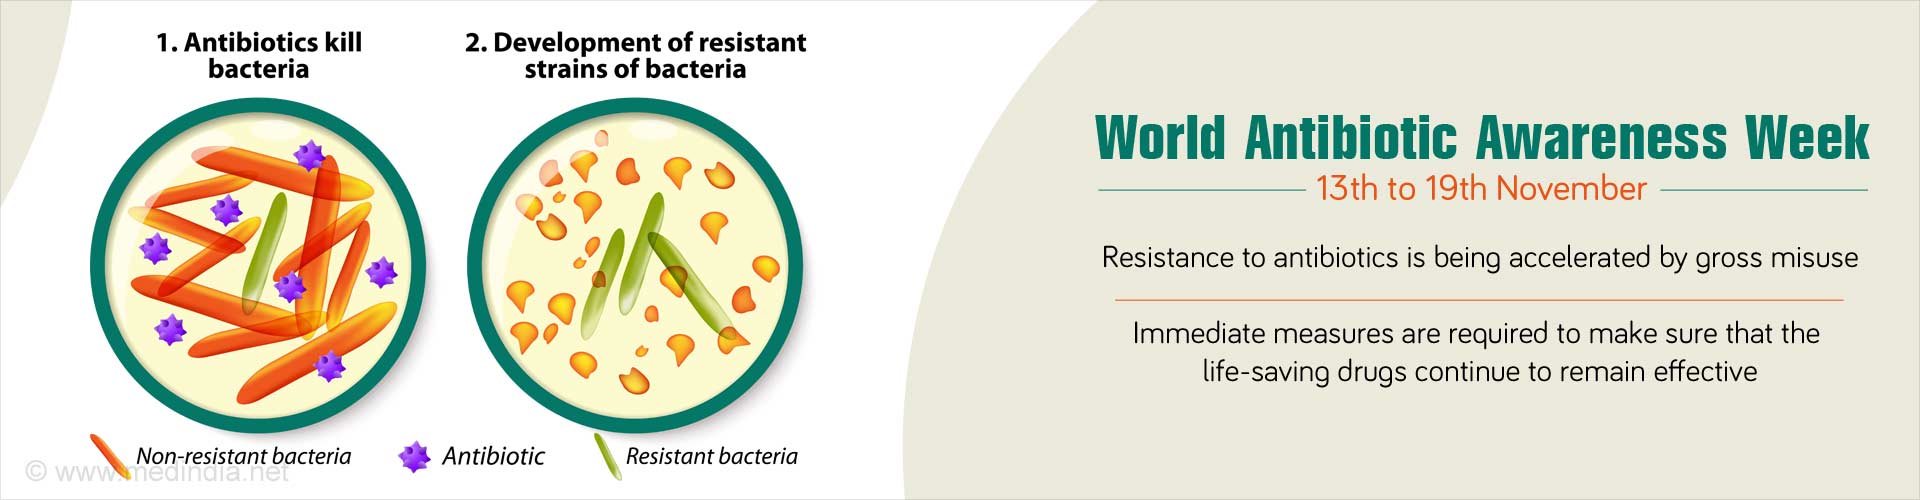 world antibiotic awareness week 
- resistance to antibiotics is being accelerates by gross misuse
- immediate measures are required to make sure that the life-saving drugs continue to remain effective